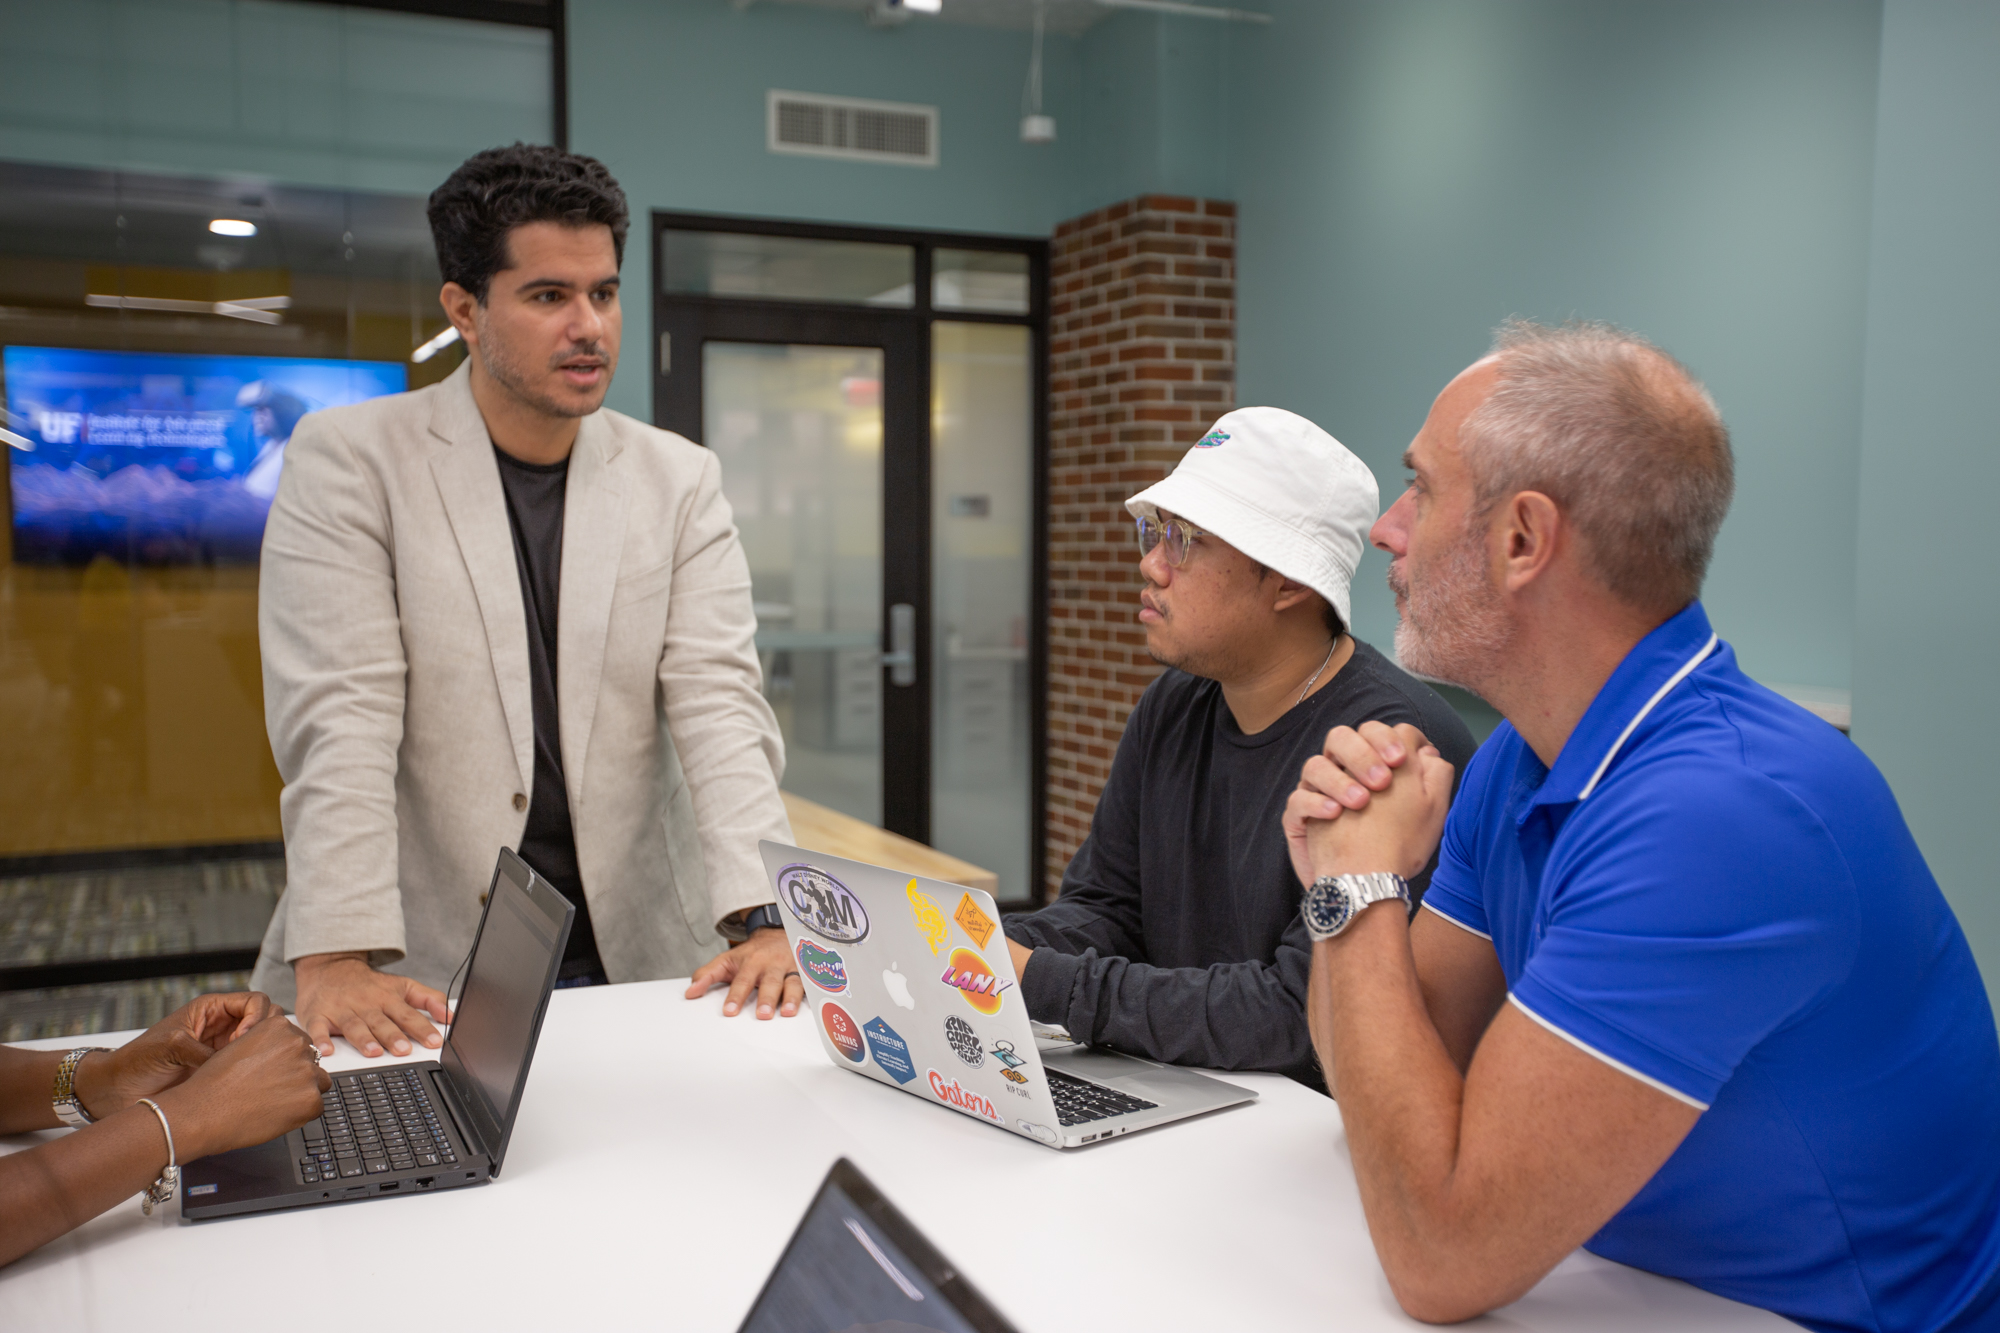 Seyedahmad Rahimi, Ph.D., a UF ed tech graduate student and Nigel Newbutt, Ph.D., sit in the IALT area of Norman Hall, discussing educational technology jobs following degree completion.